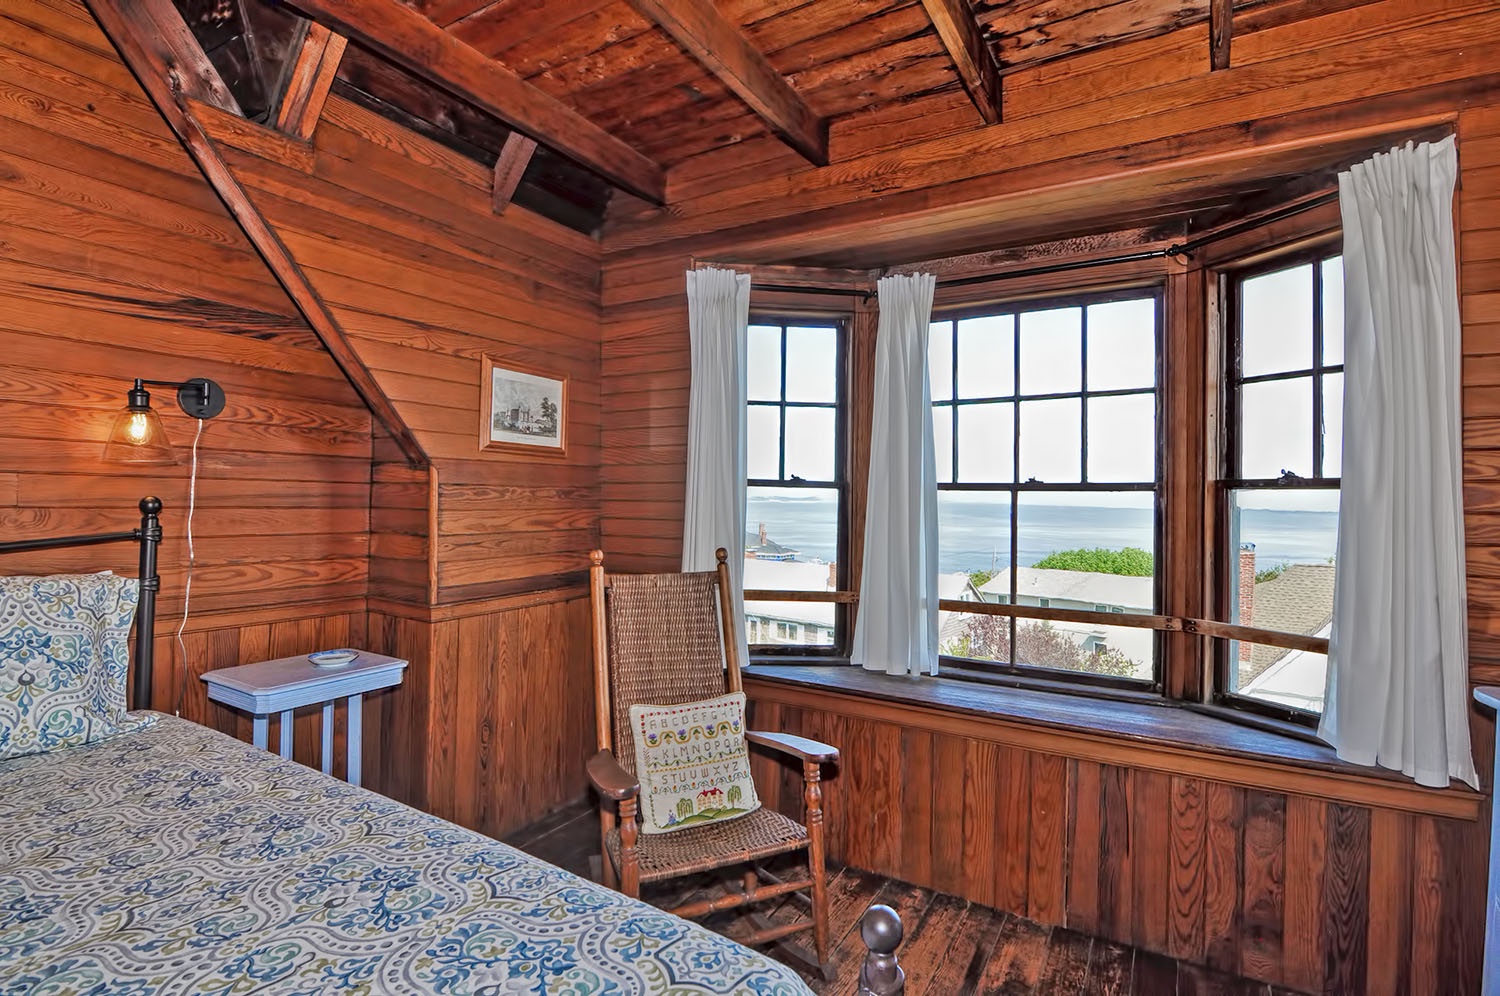 Enjoy views of the ocean from the window seat or rocking chair.